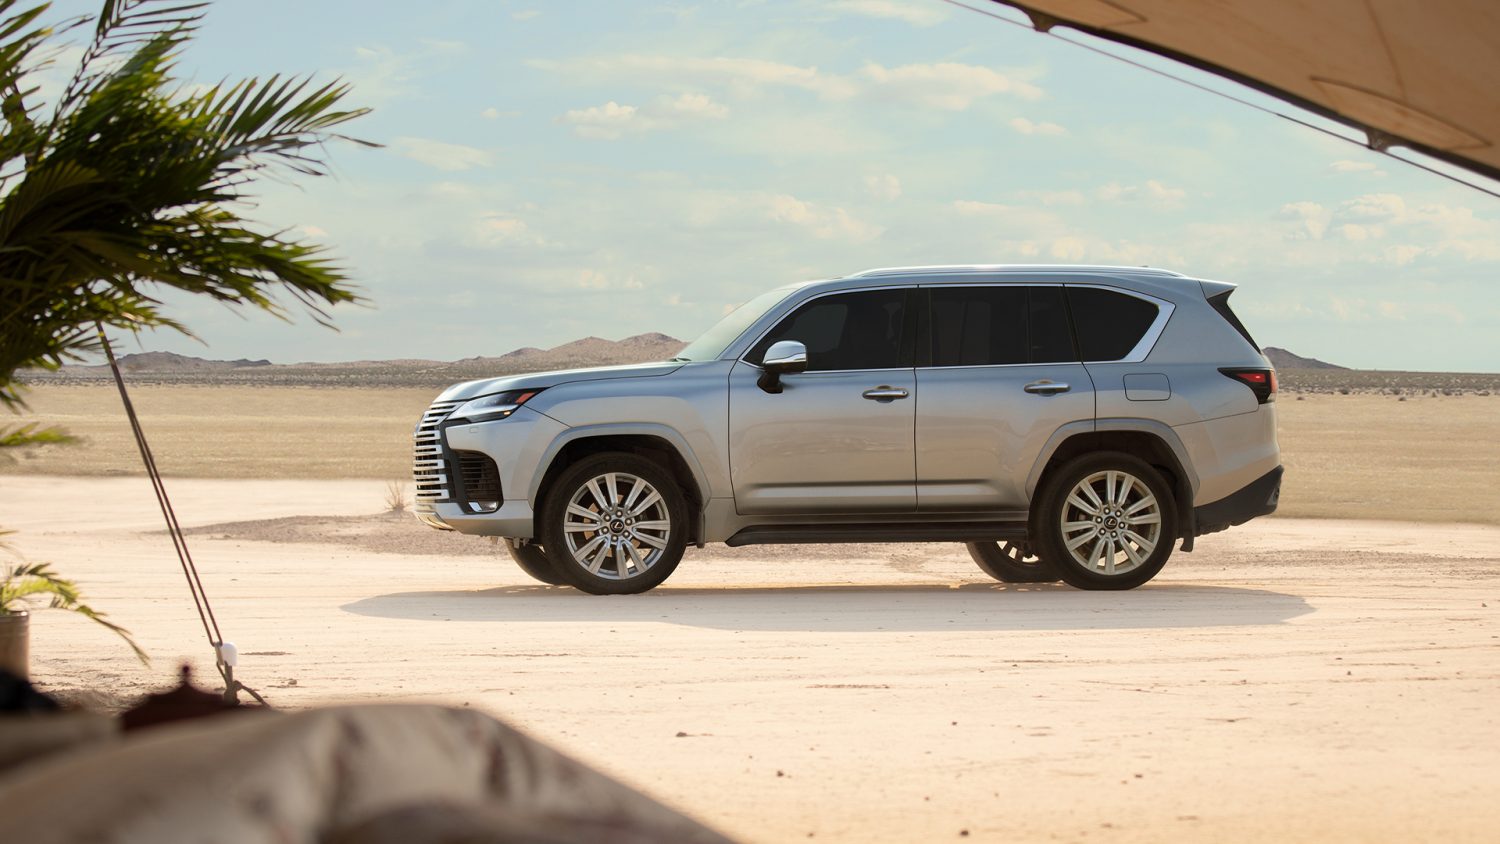 2022 Lexus LX600: smooth, luxurious and powerful